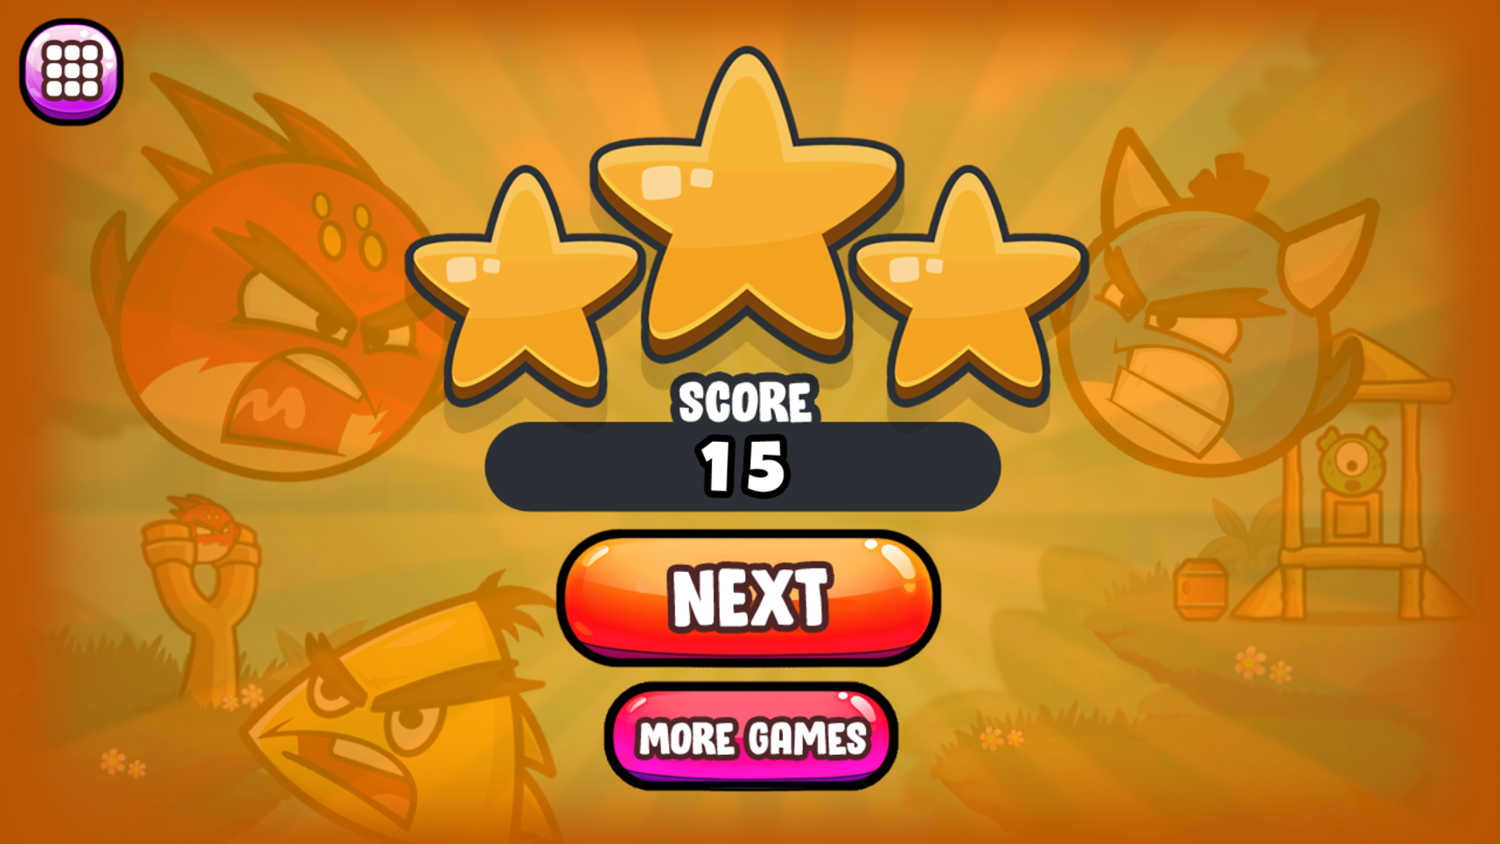 Angry Heroes Game Level Complete Screenshot.